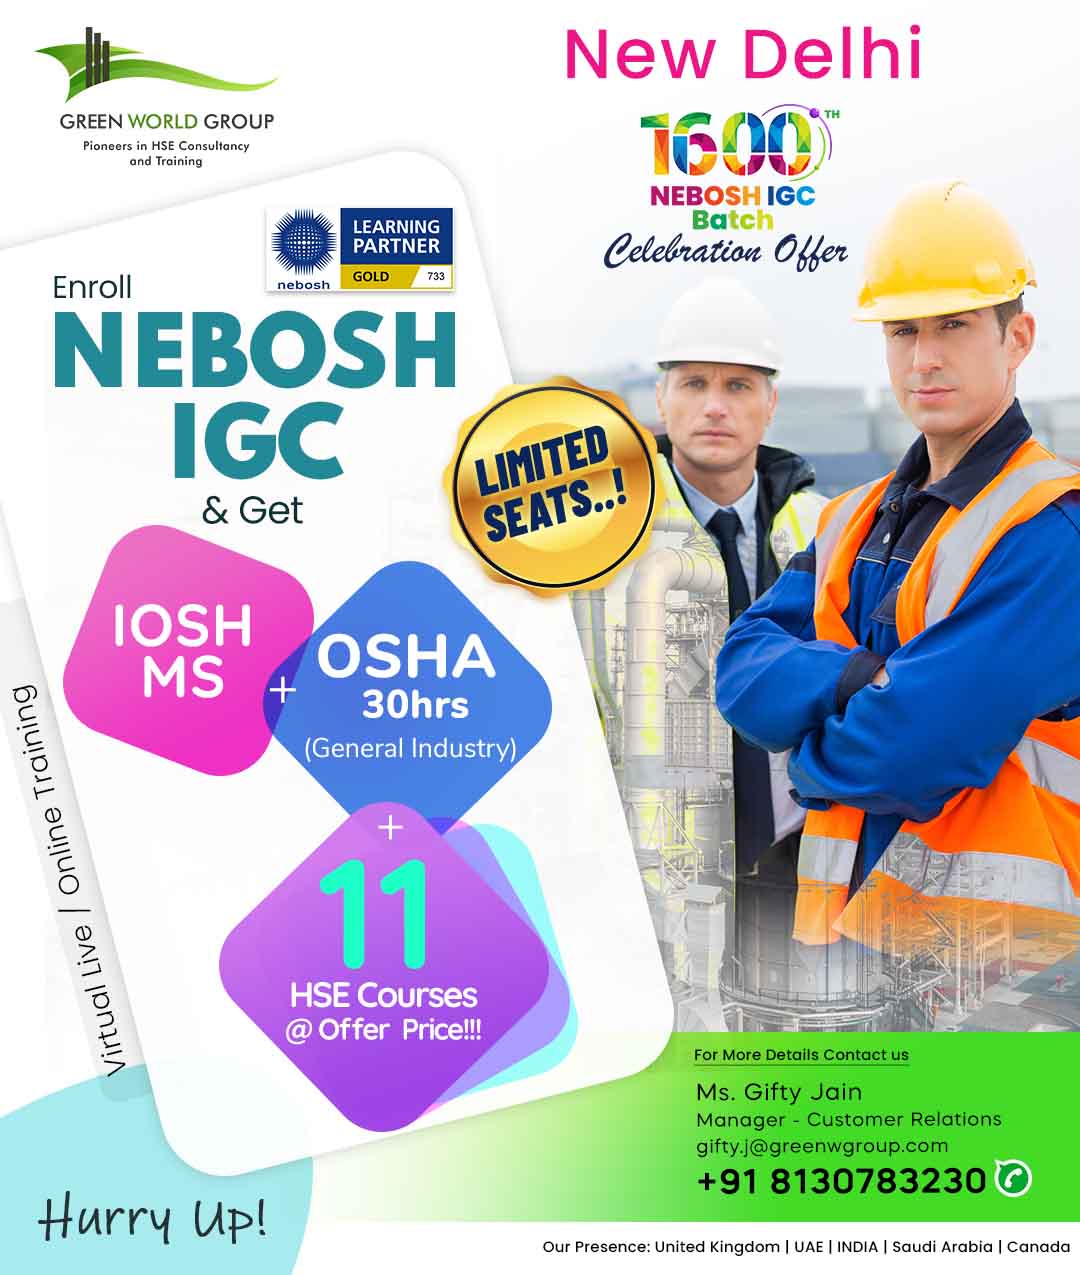 You are currently viewing Nebosh Course in New Delhi – by Green World Group